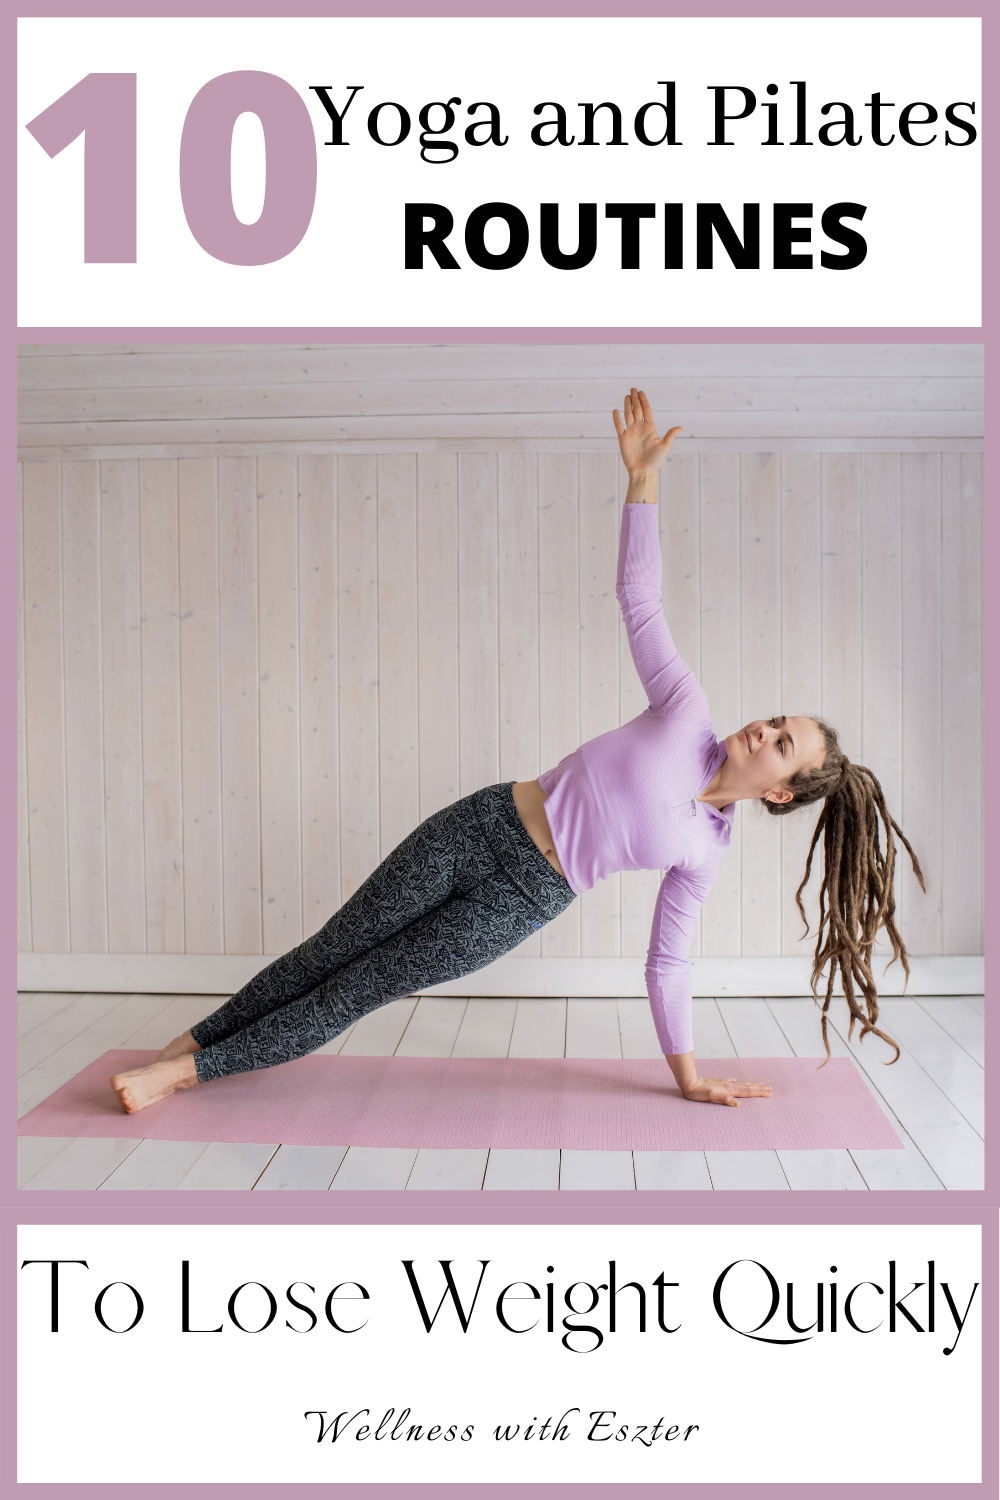 10 YOGA AND PILATES ROUTINES that are great for WEIGHT-LOSS - Wellness